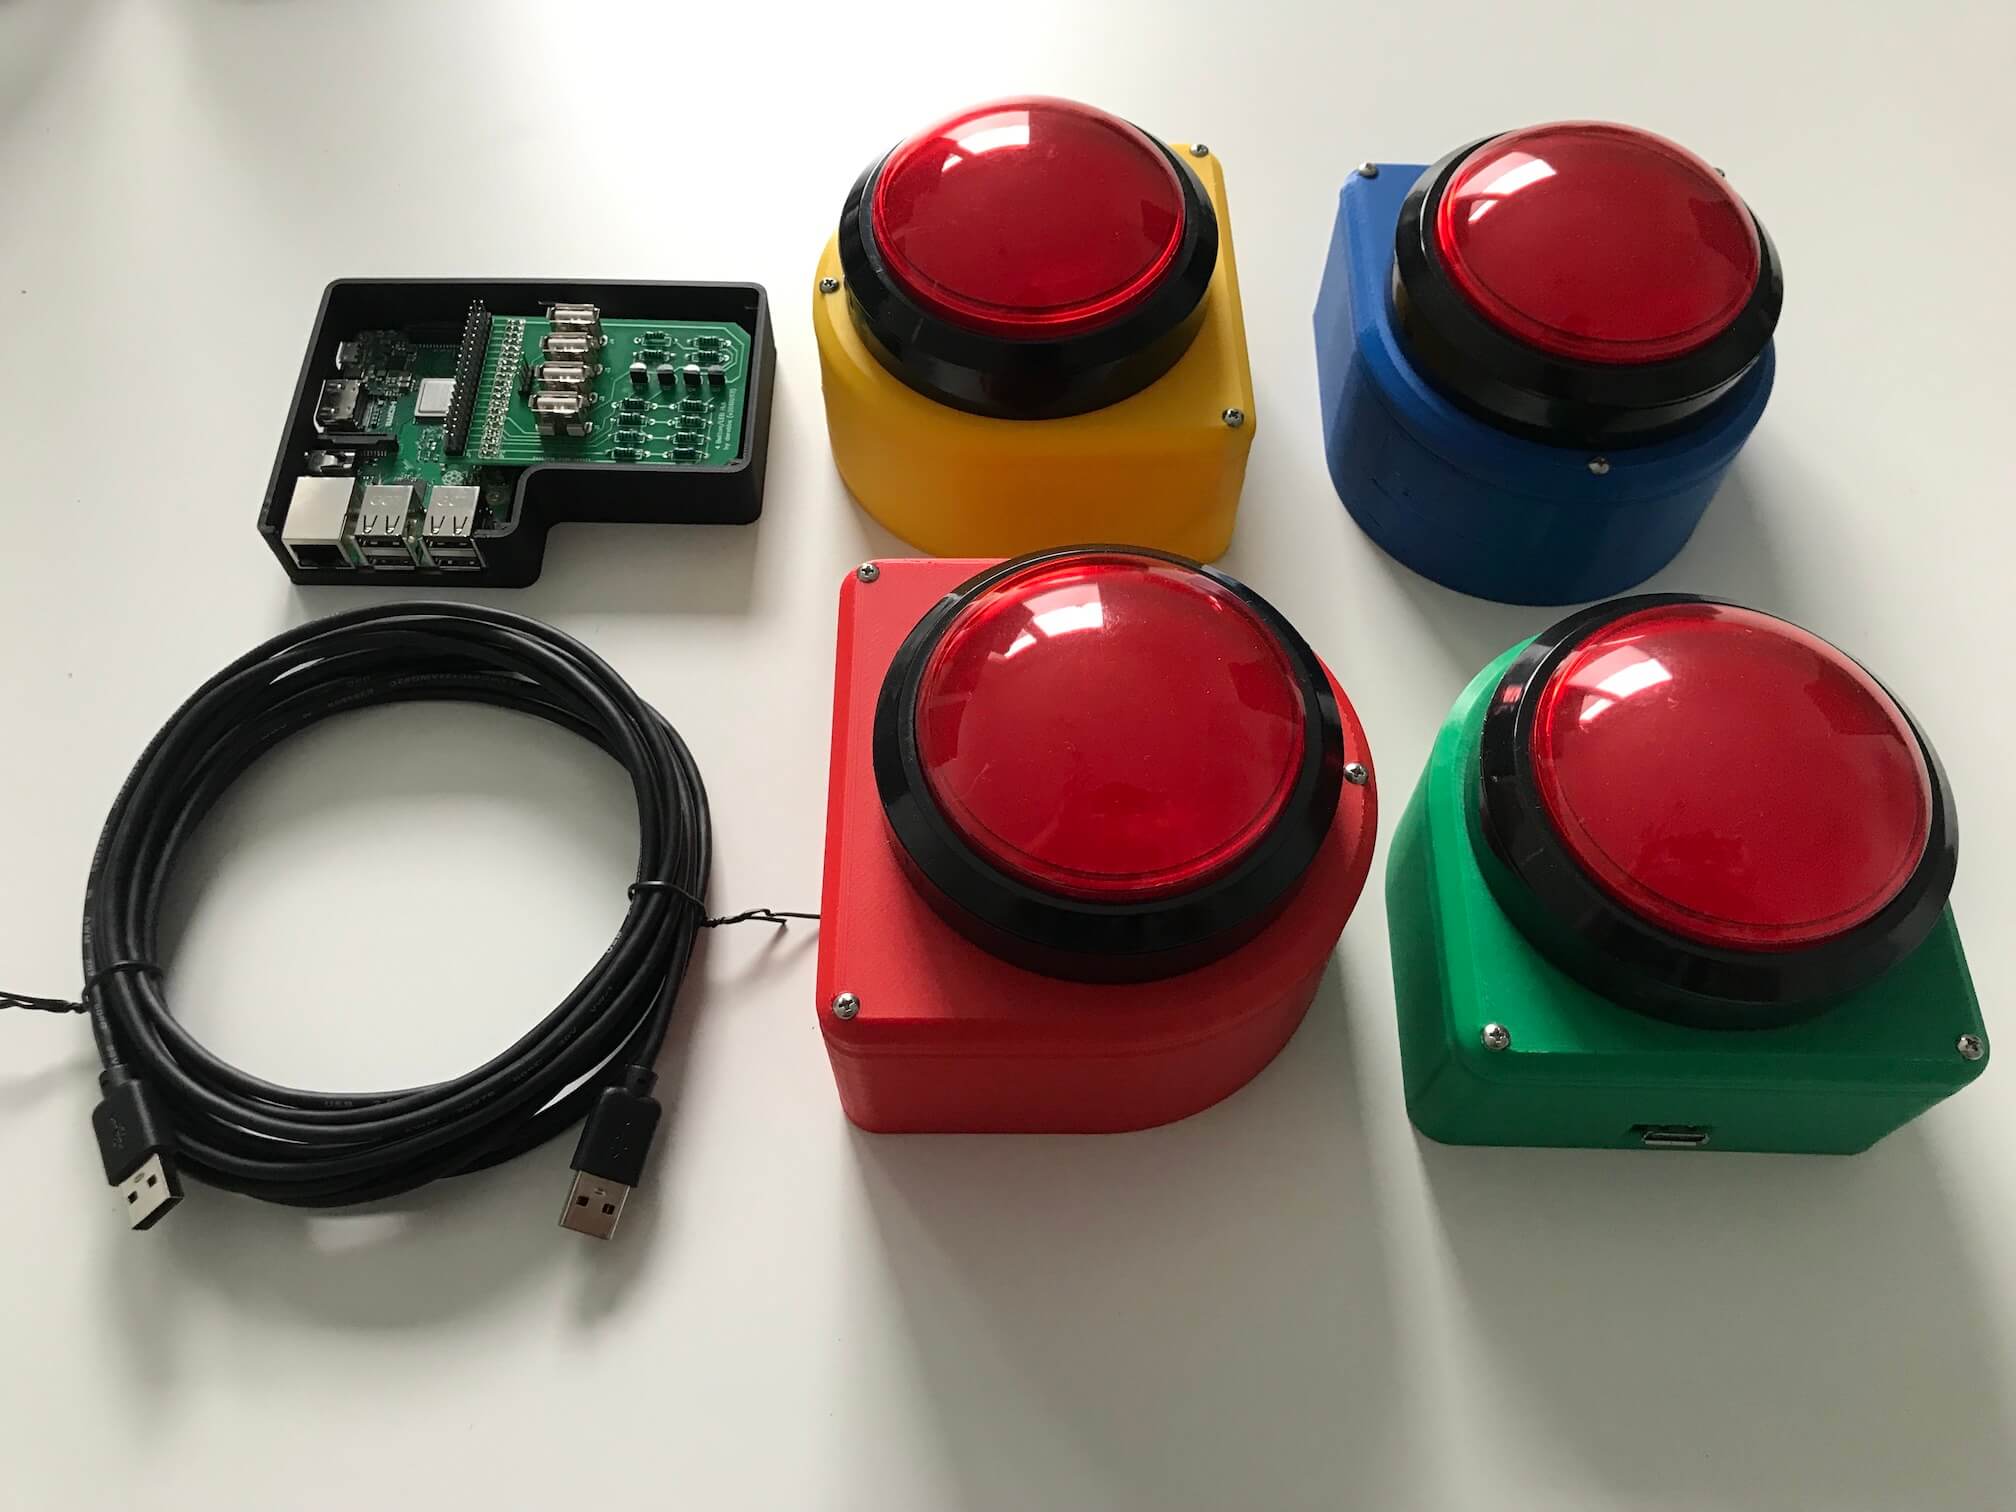 things with buzzers: The final result - four game show buzzers, a raspberry pi, and a custom printed circuit board.